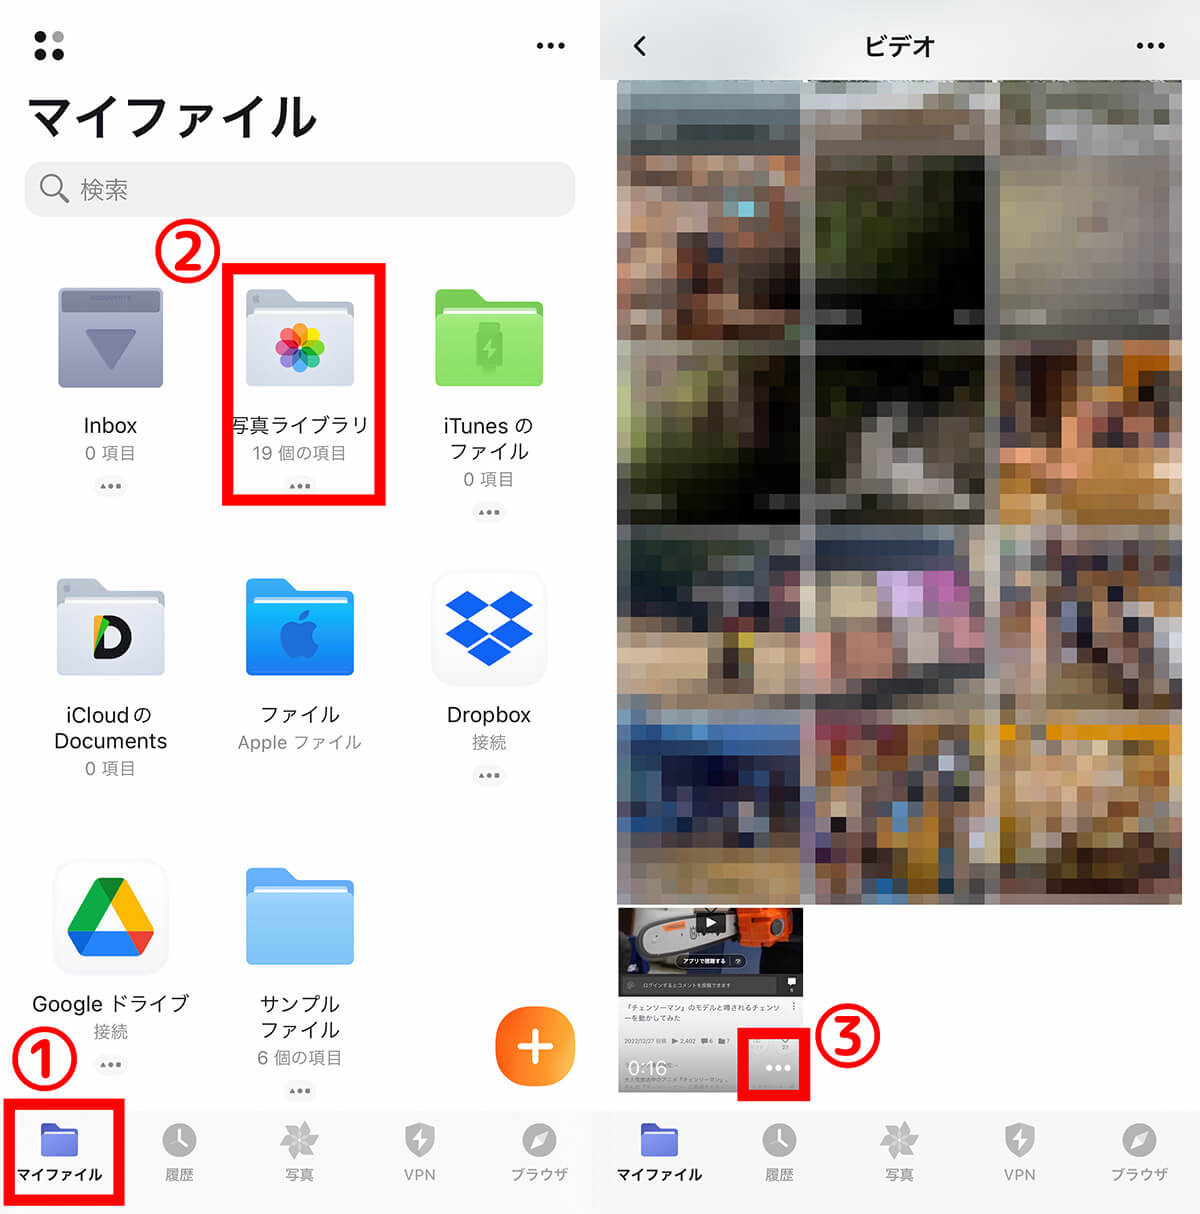 【4】Documents by Readdle（iPhone / 高音質：320kbps対応）：画面収録を利用し音声を抽出可能3